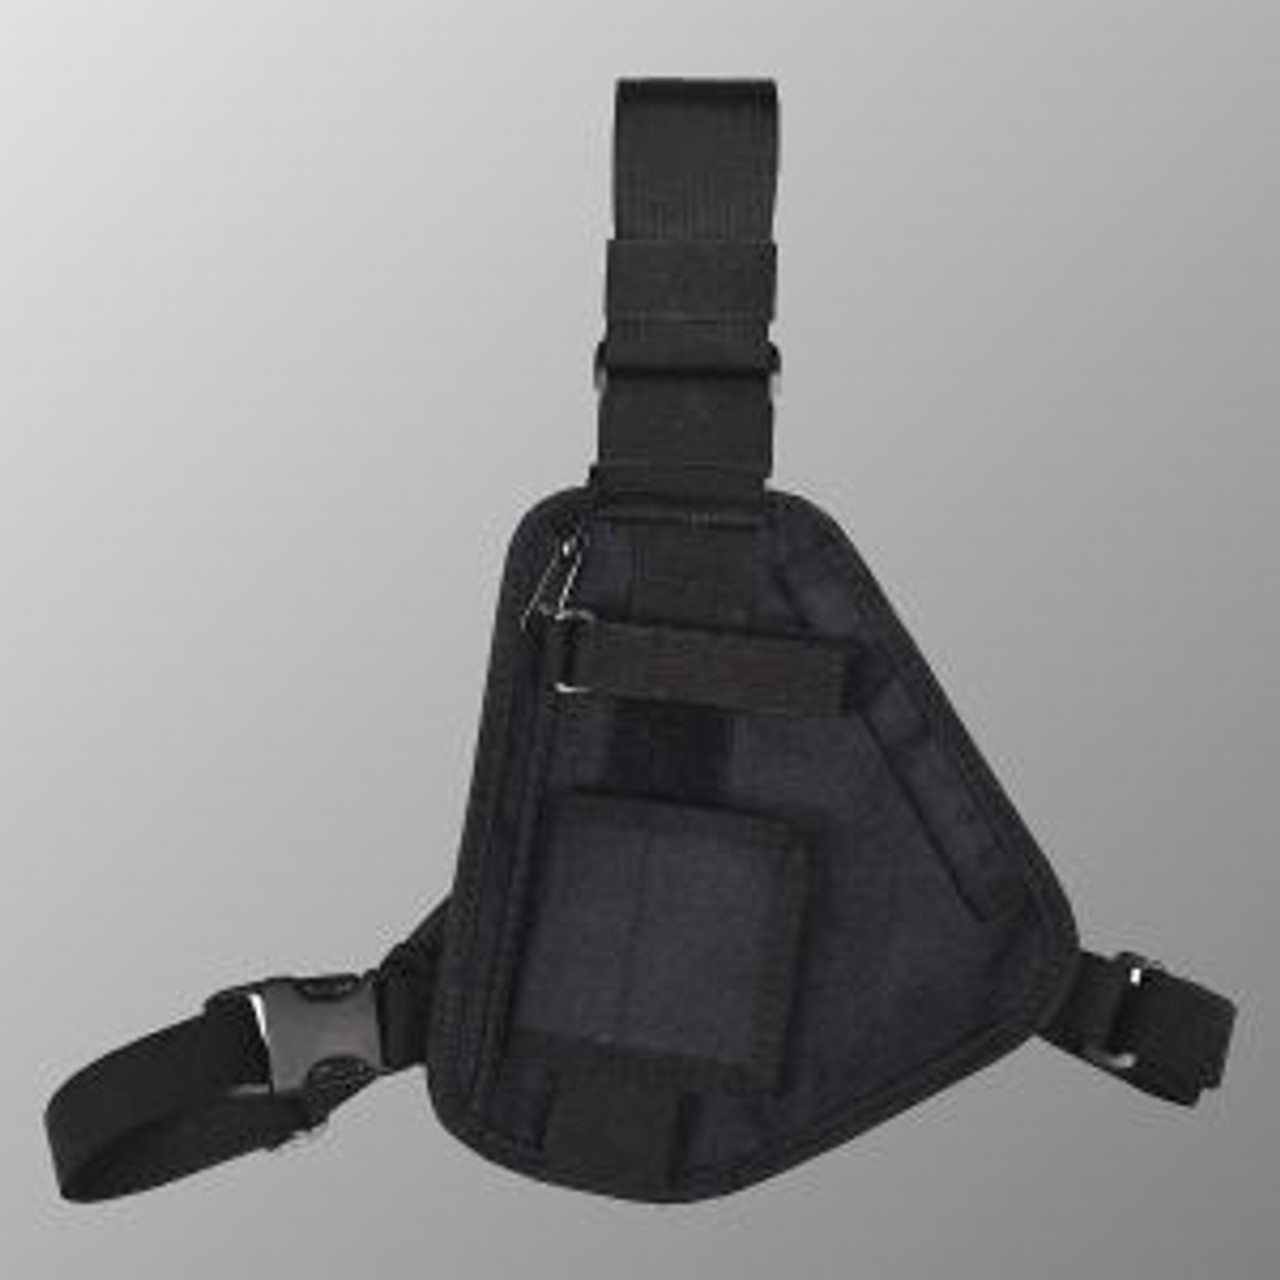 Motorola XPR6380 3-Point Chest Harness - Black